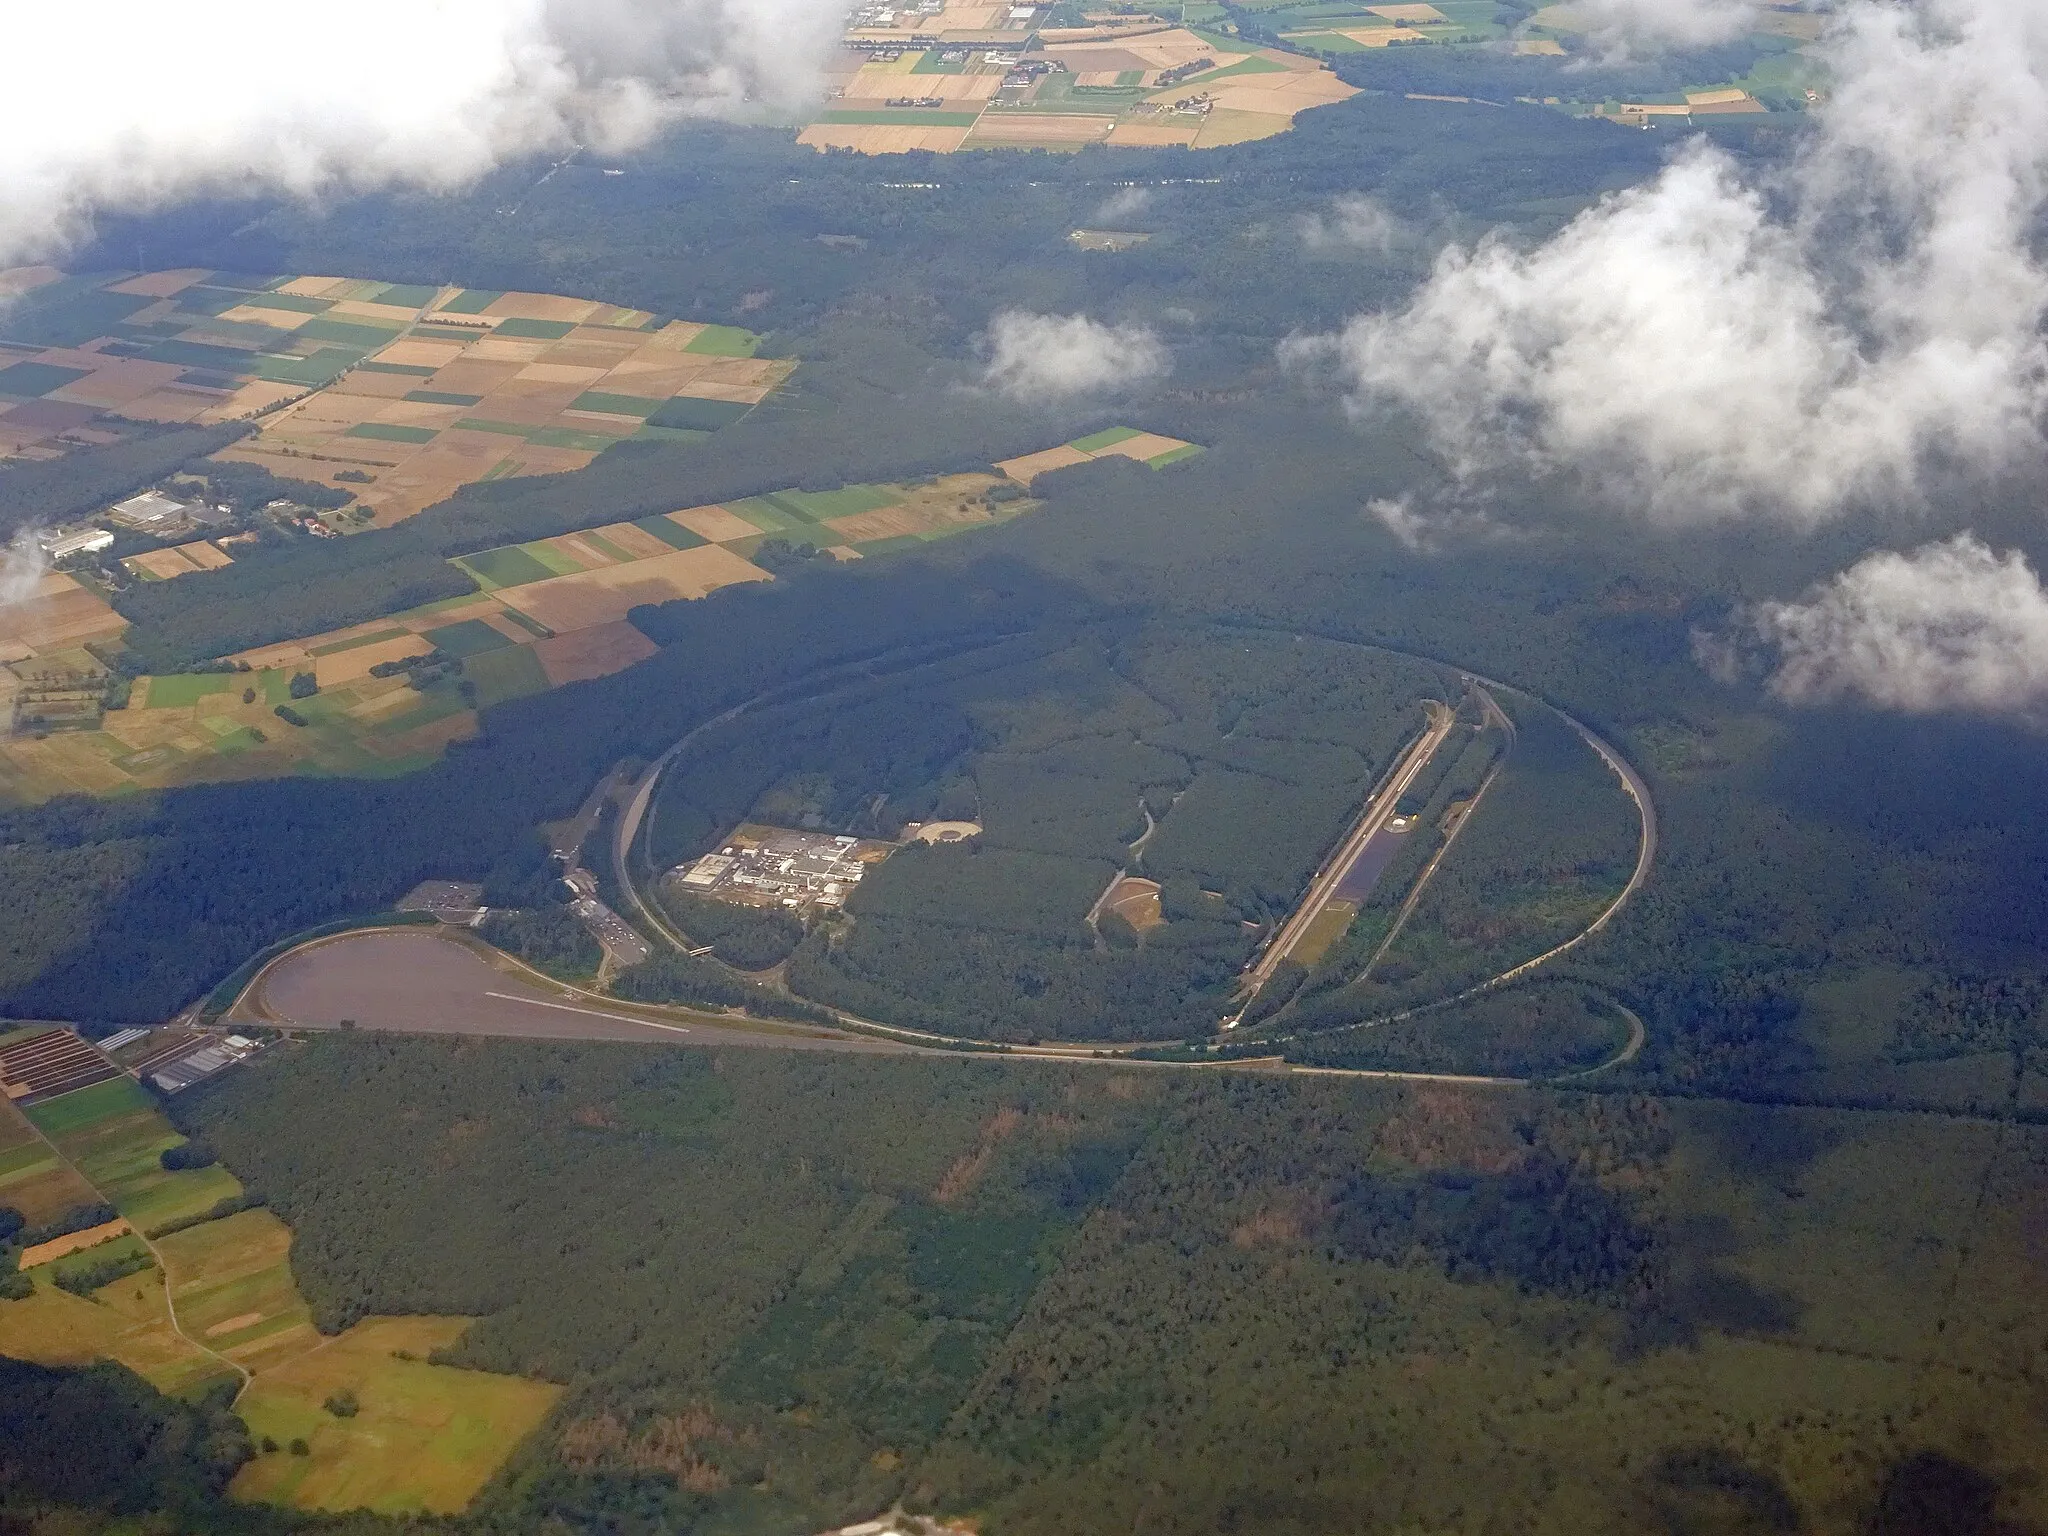 Photo showing: The Segula Technologies test site in Rodgau-Dudenhofen, built by Opel in 2014. The photo was taken during a flight from Naples to Frankfurt/Main with a passenger aircraft on approach to Frankfurt/Main Airport.